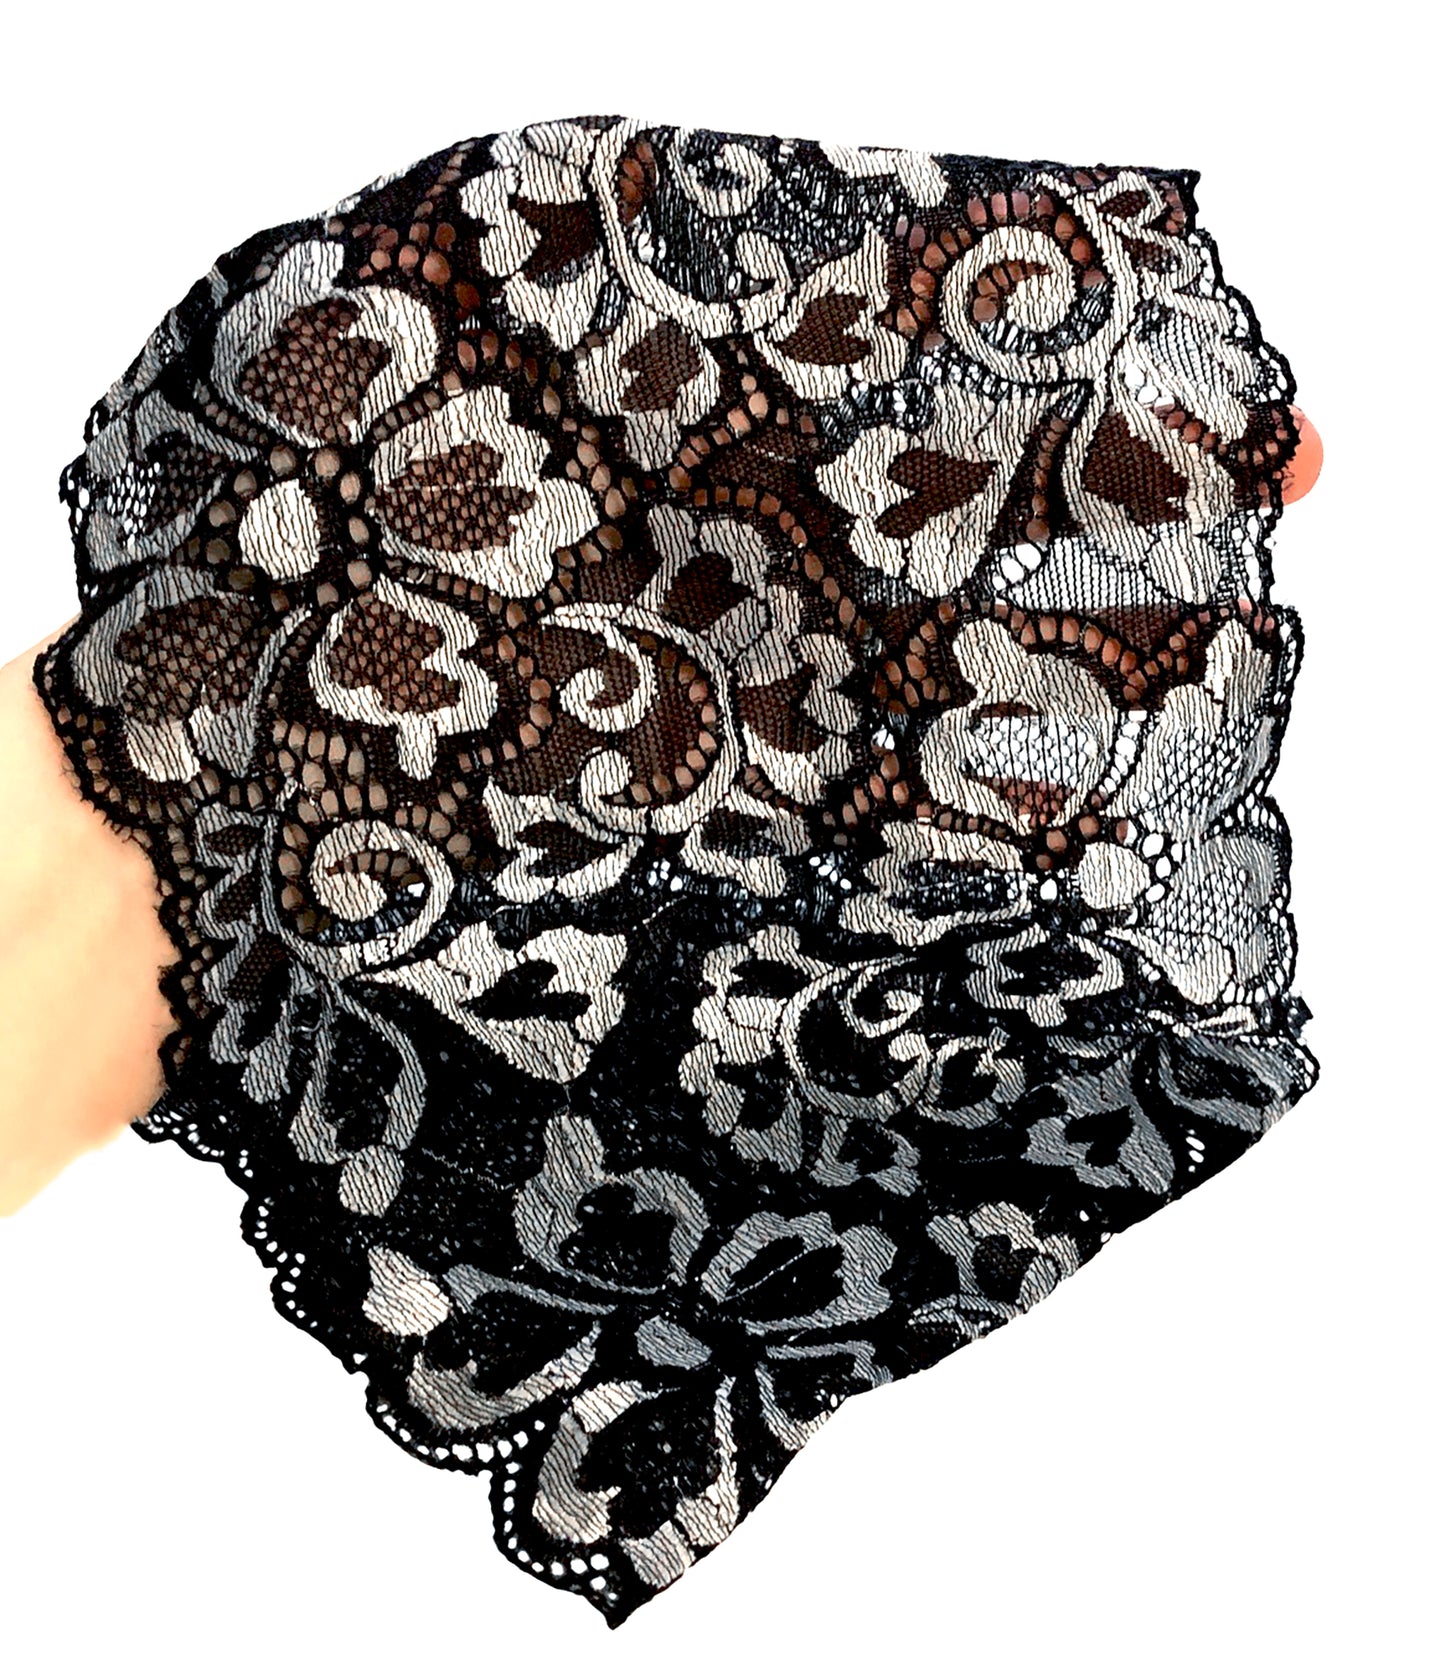 Black silver floral shabby chic lace headband